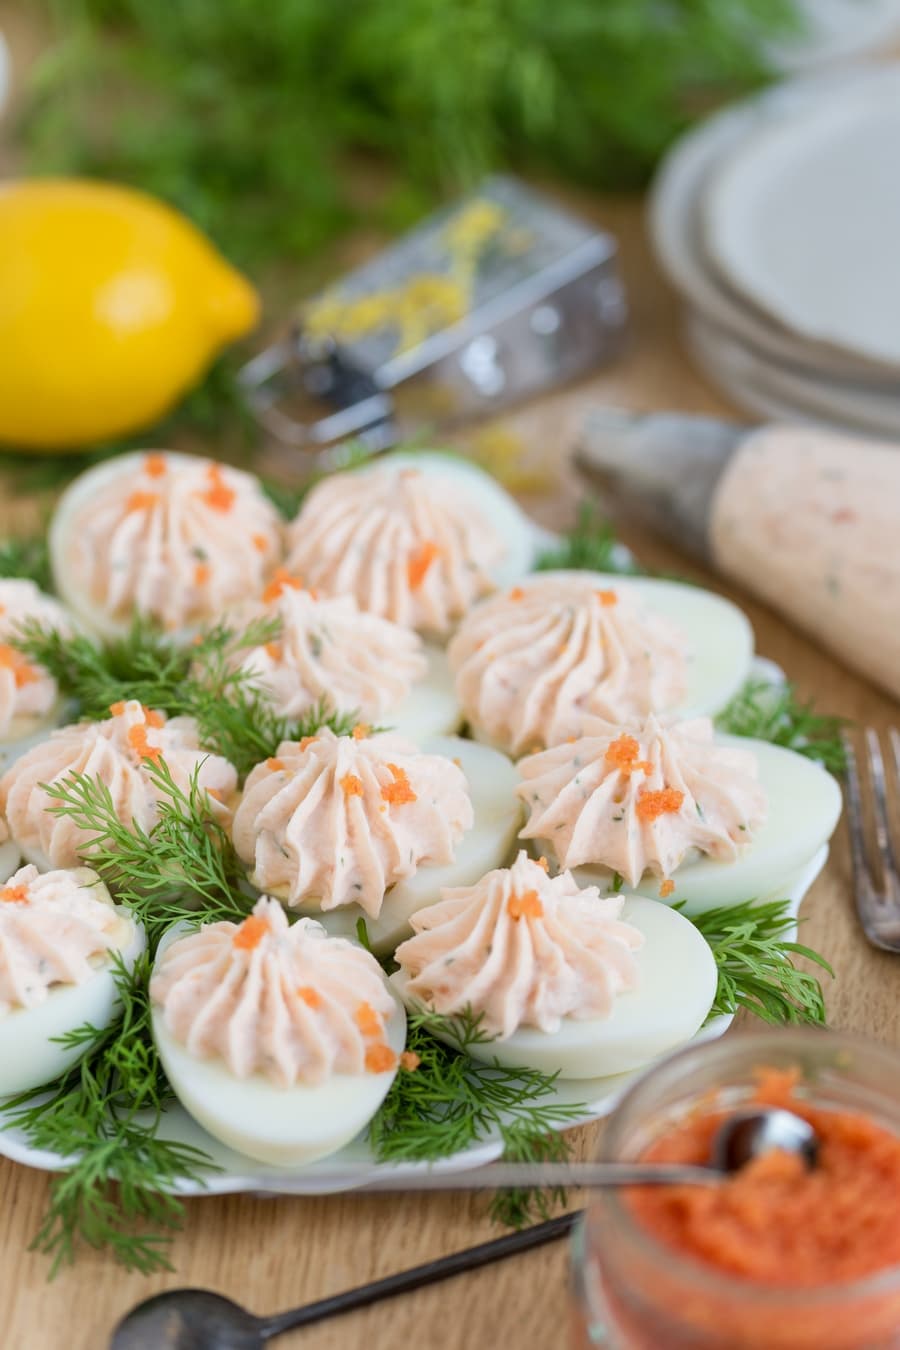 Scandinavian deviled eggs with smoked salmon mousse and fish roe